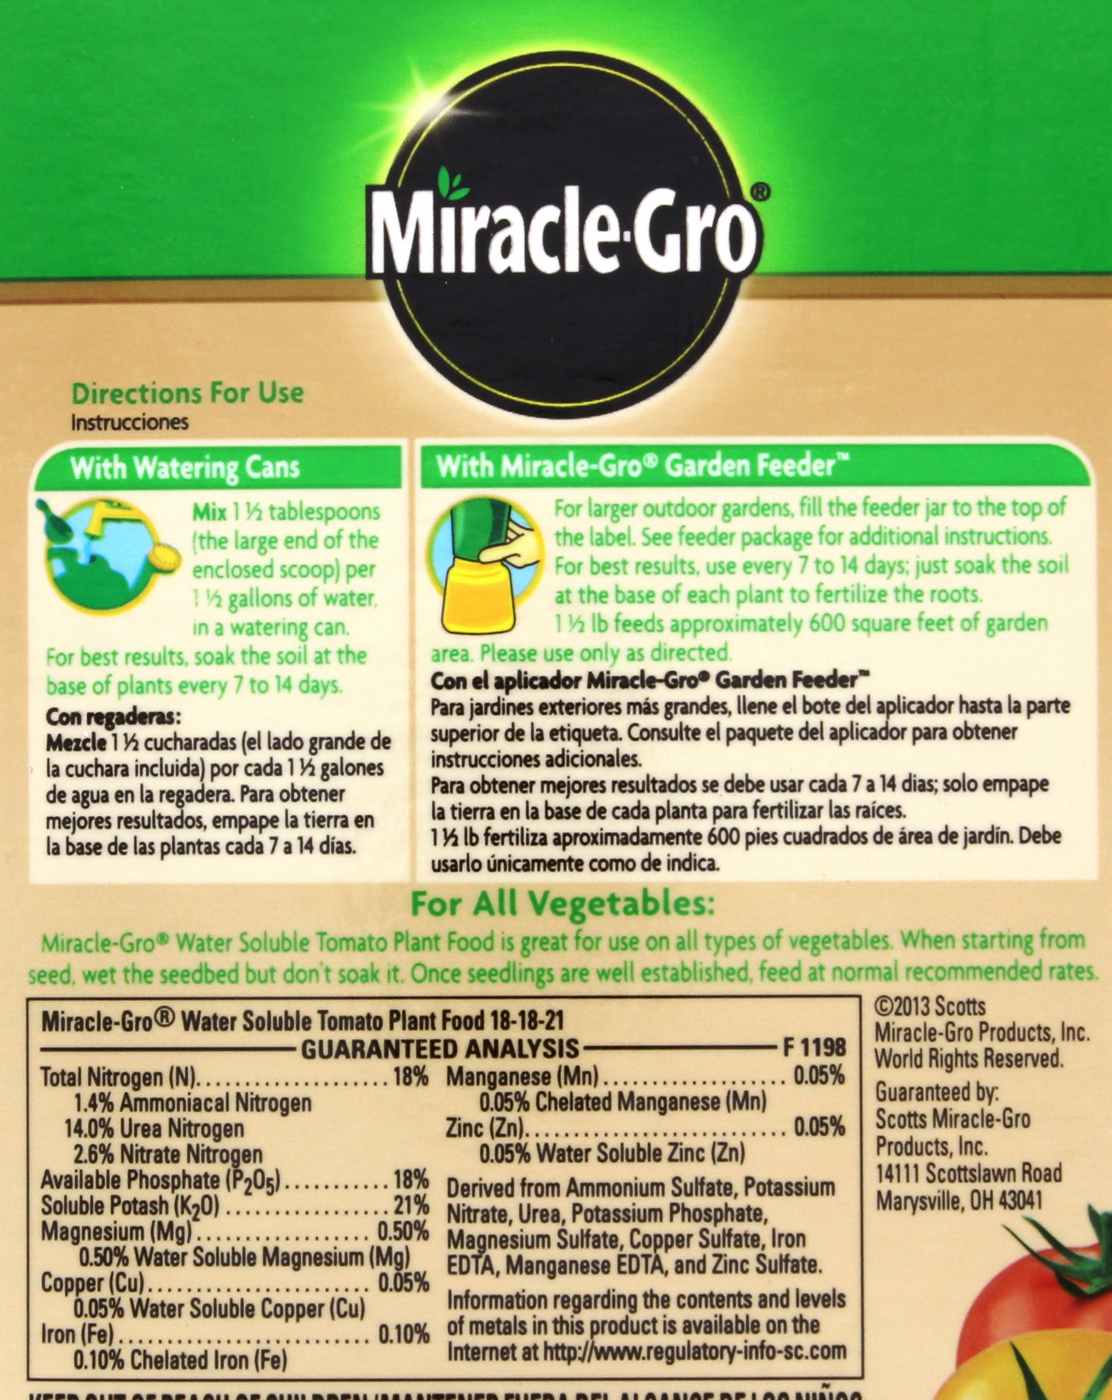 Miracle-Gro Tomato Plant Food; image 2 of 2